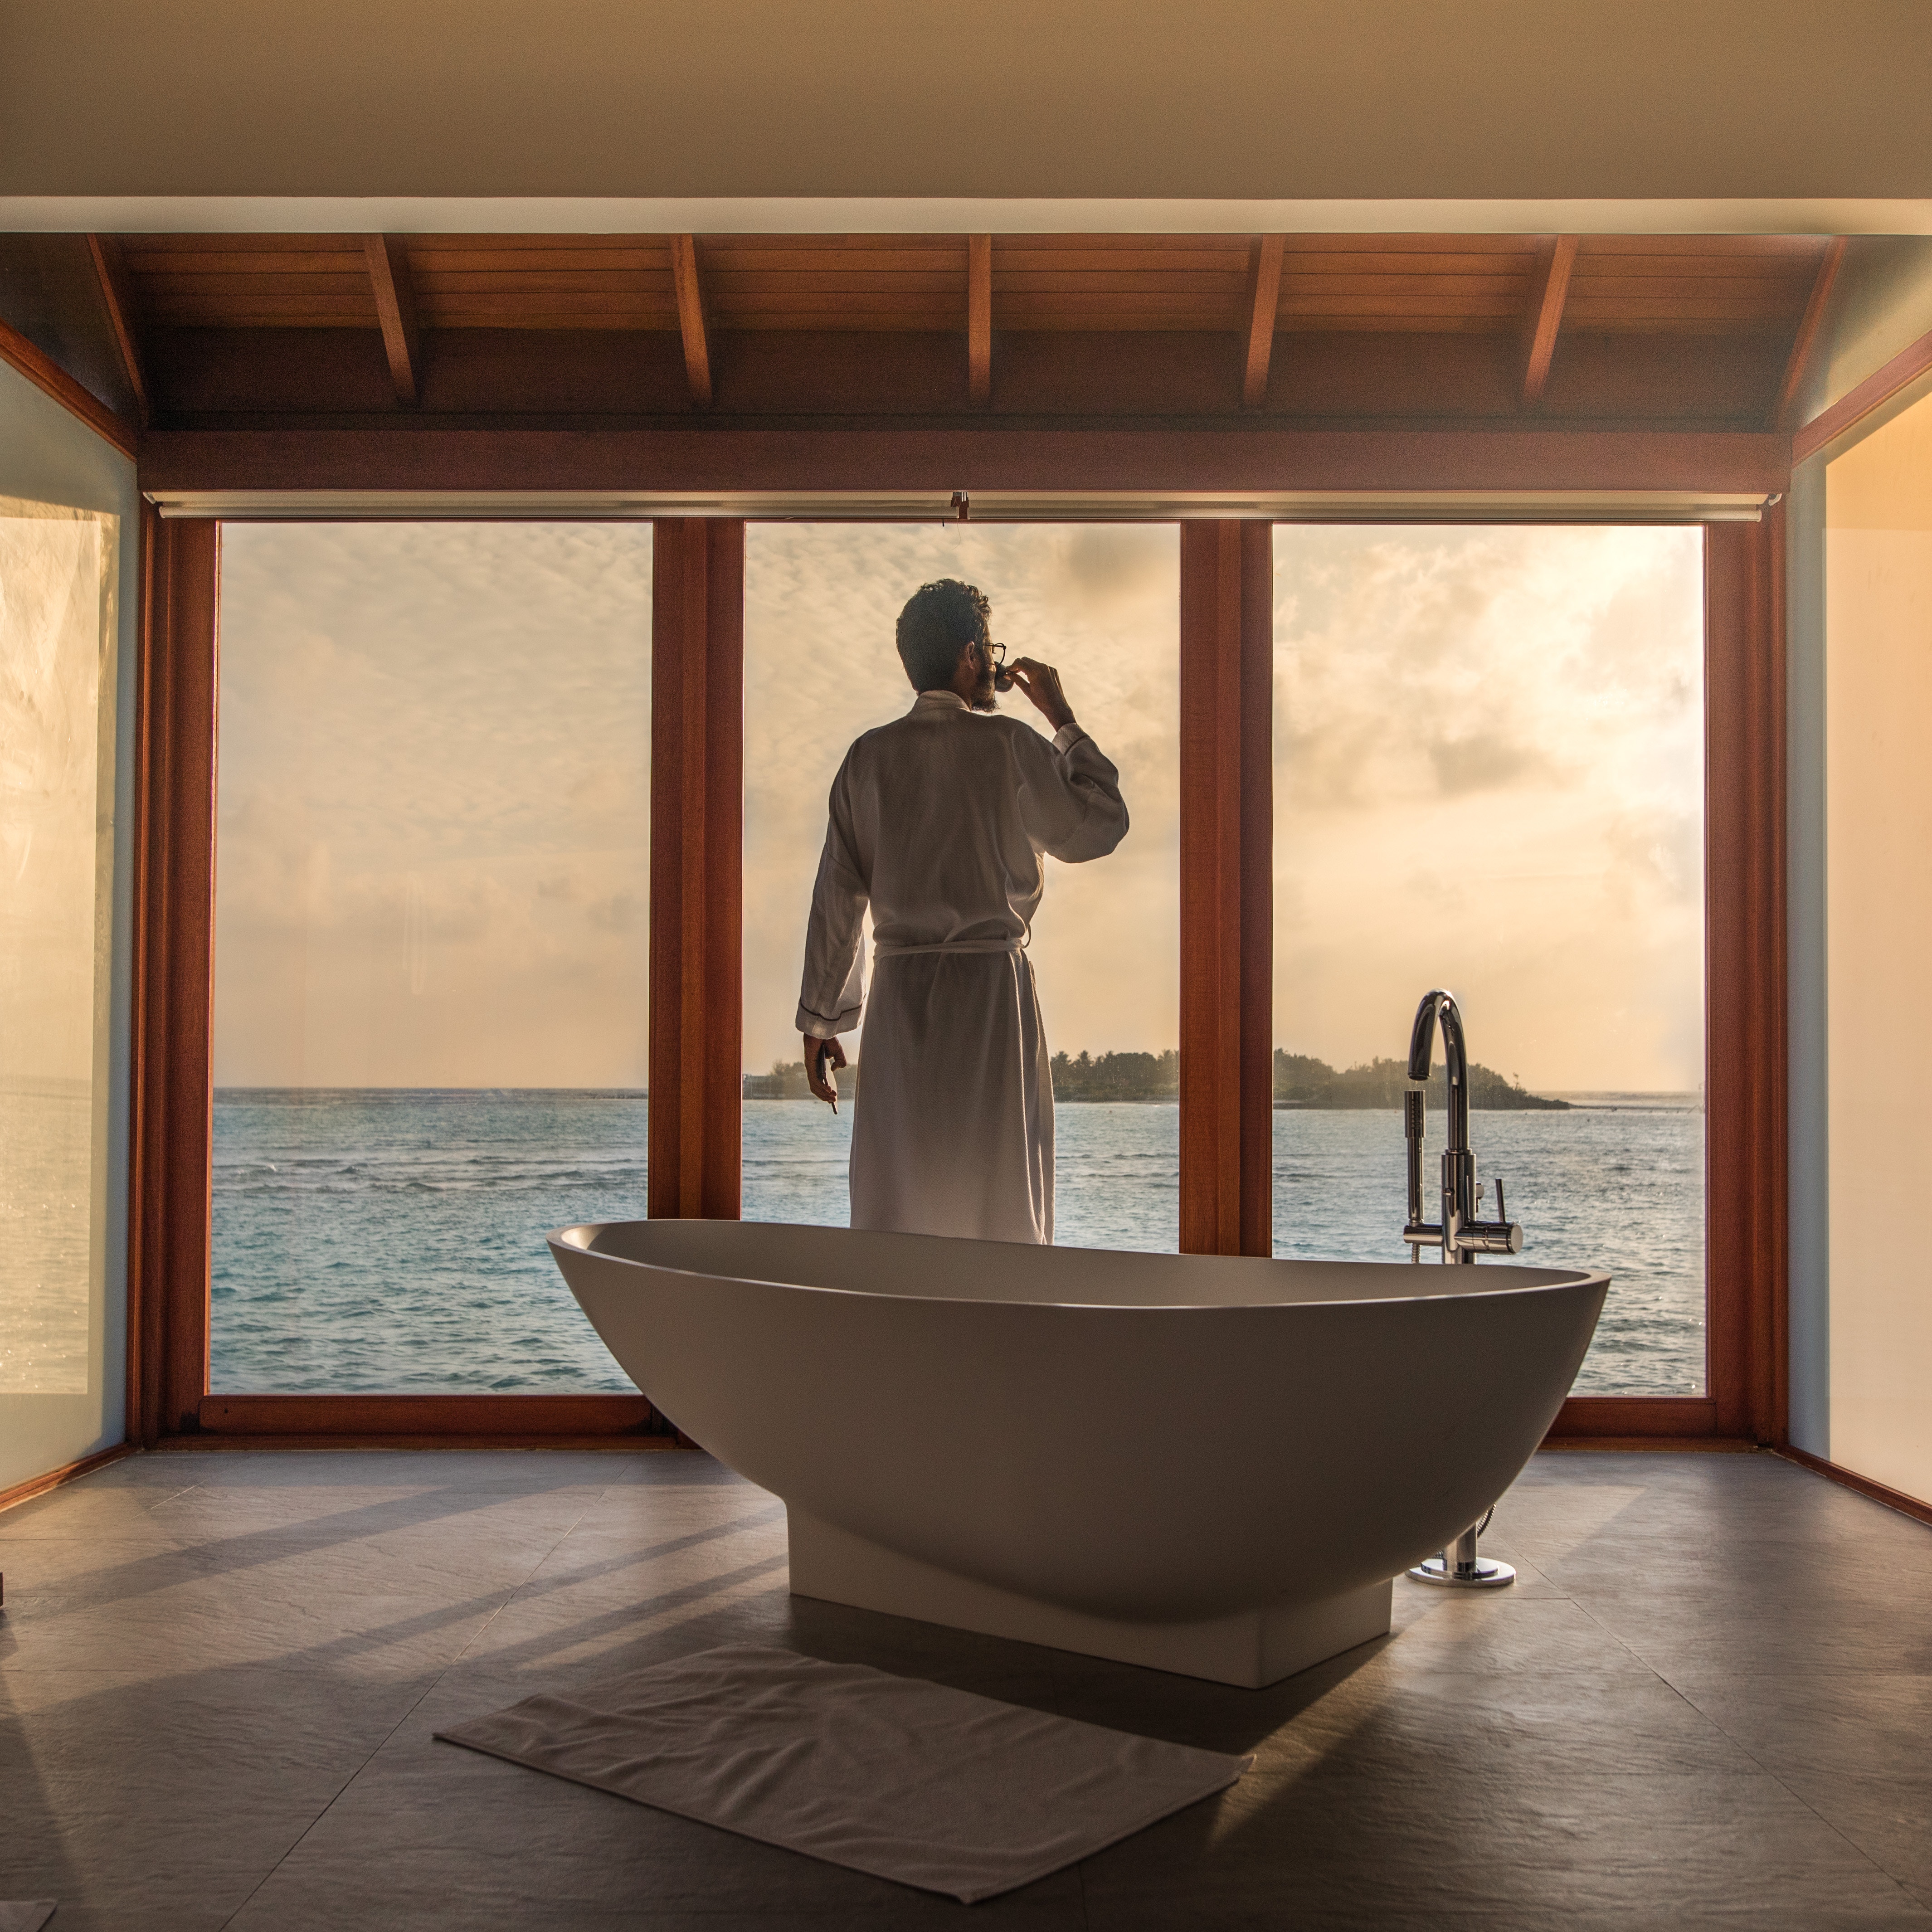 Man looking out to sunset, dressed in a luxurious bathrobe and beside a spectacular bath, after getting up from bed to have a cup of tea or coffee.